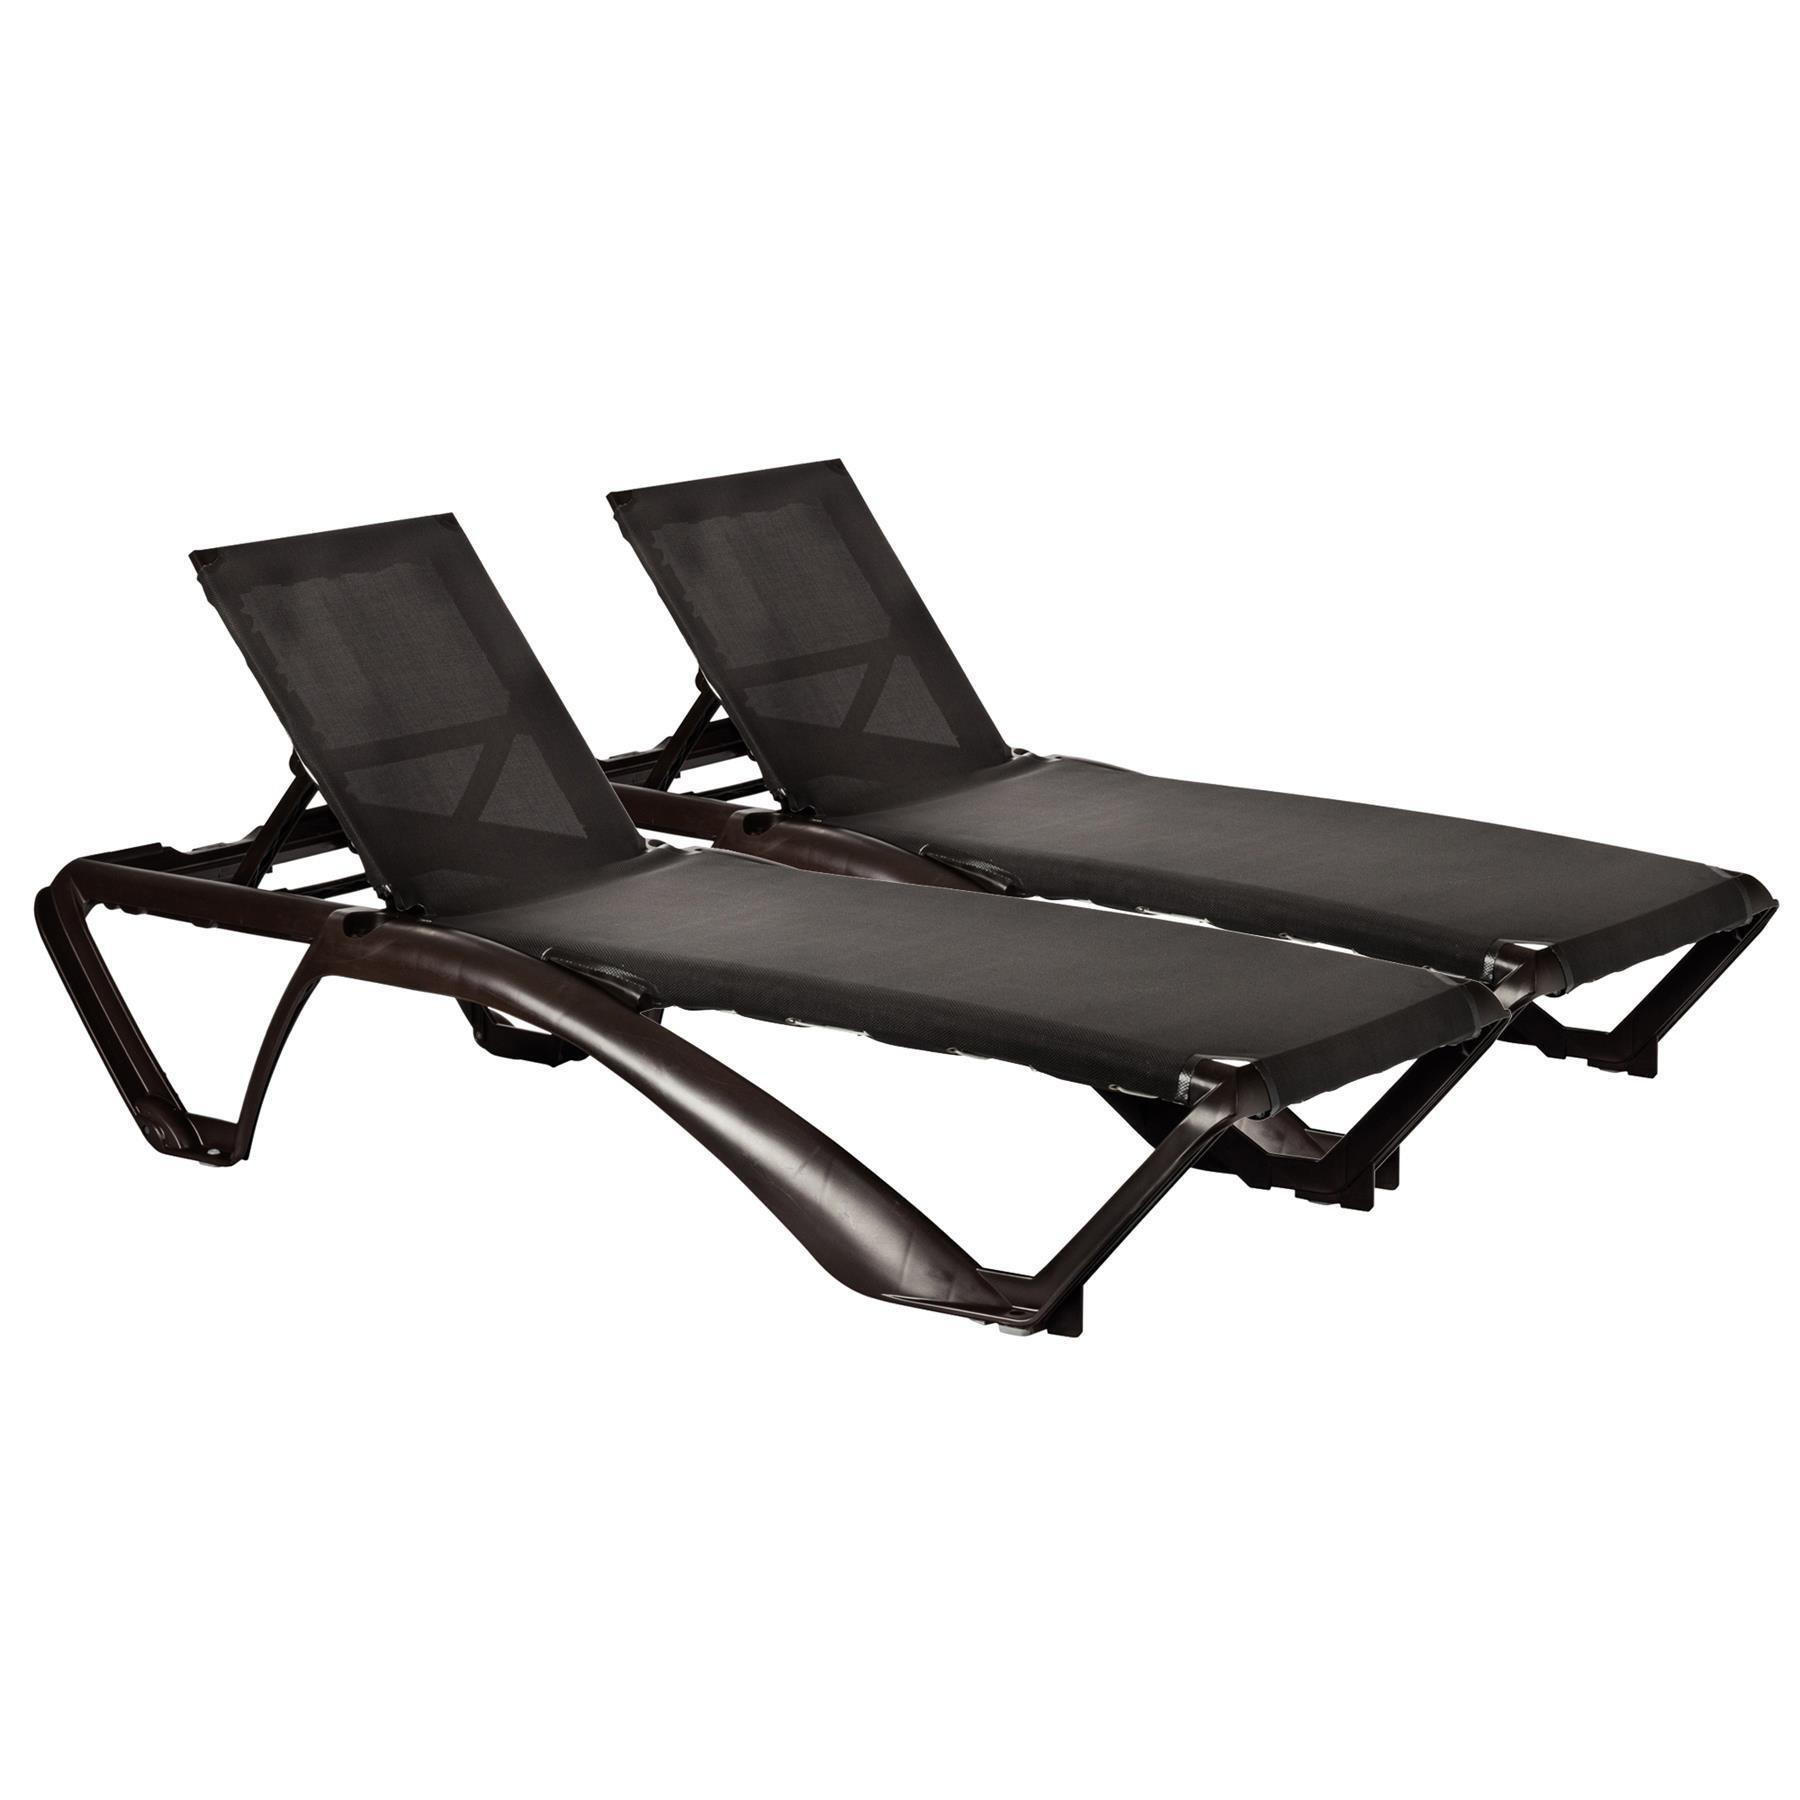 Marina 4 Position Canvas Sun Loungers Pack of 2 - image 1